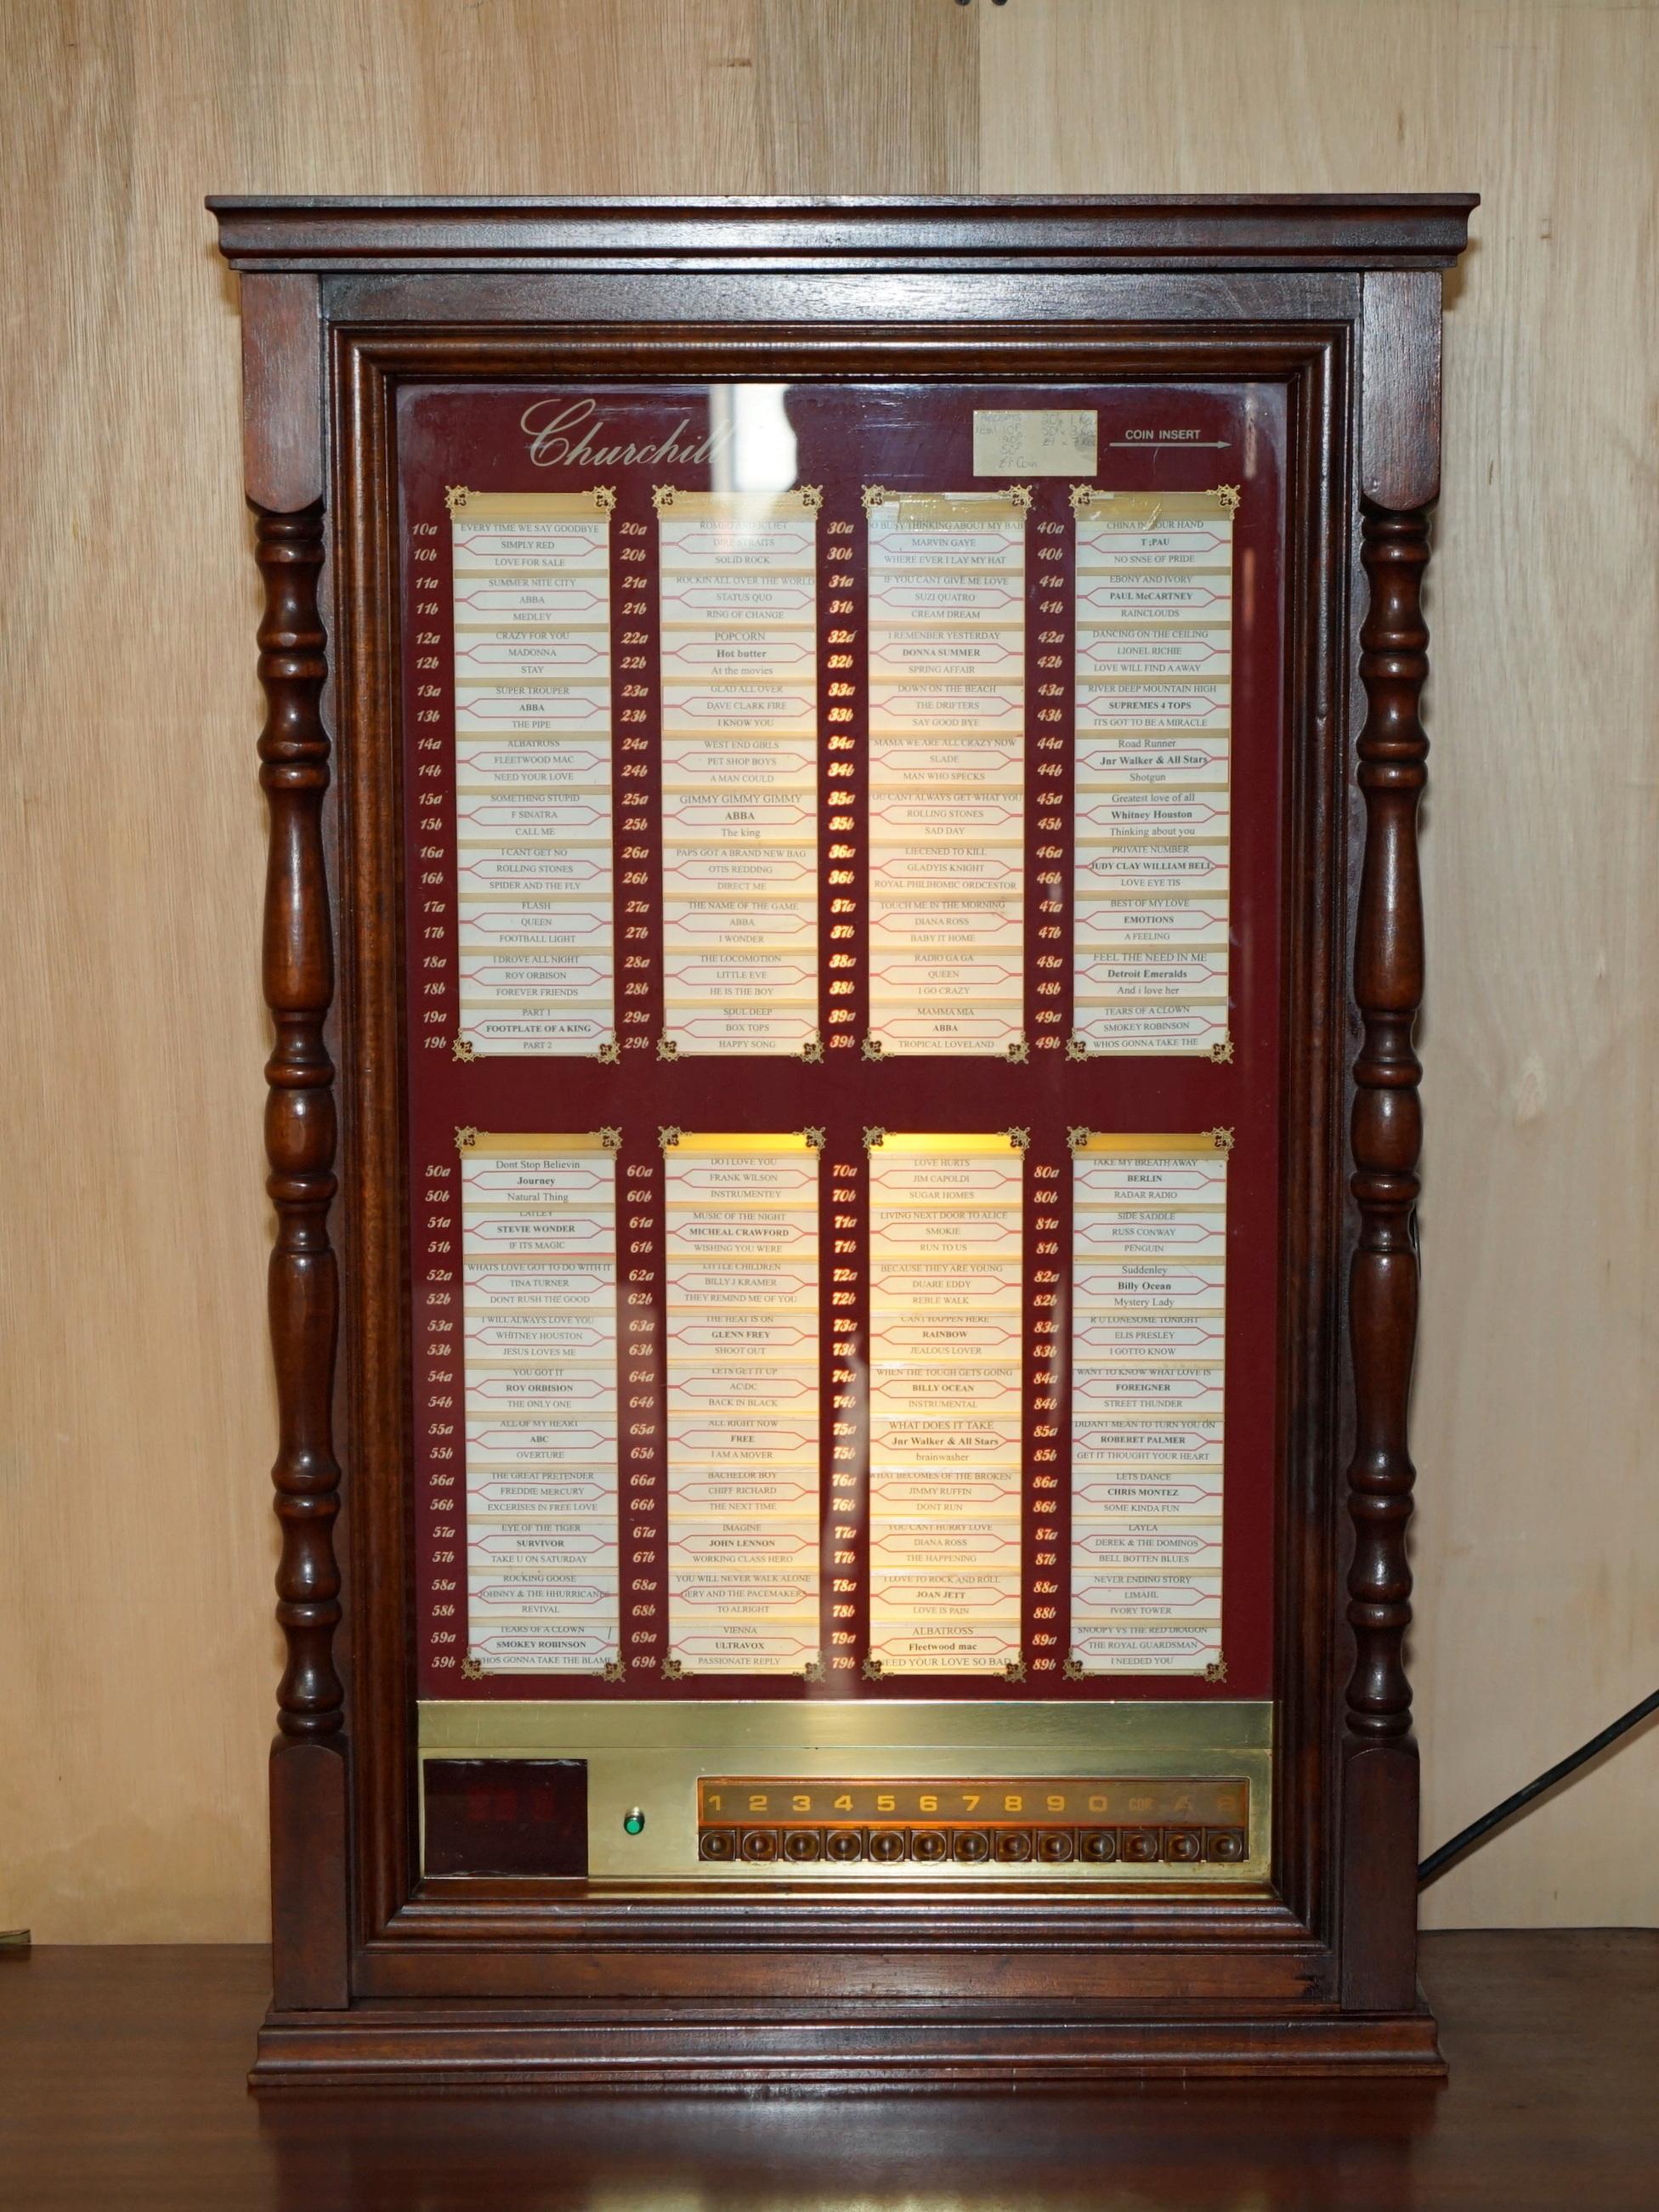 Royal House Antiques

Royal House Antiques is delighted to offer for sale this rather unique 1970’s Airedale Jukebox with Churchill selection panel and pair of speakers

Please note the delivery fee listed is just a guide, it covers within the M25